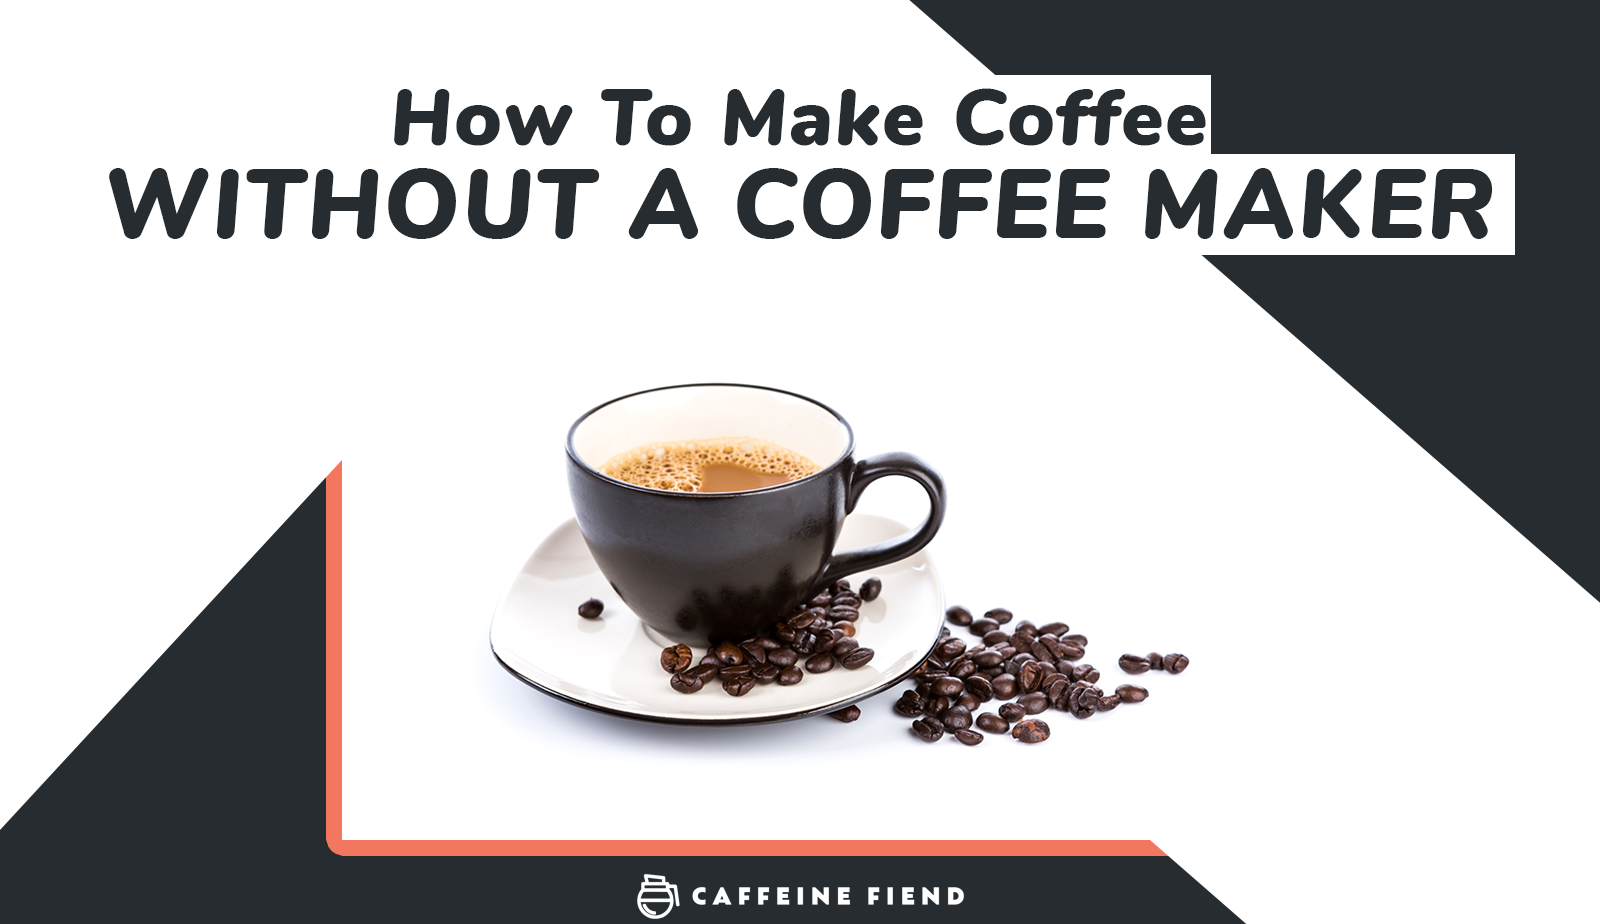 How to Make Coffee Without a Coffee Maker: 27 Different Methods